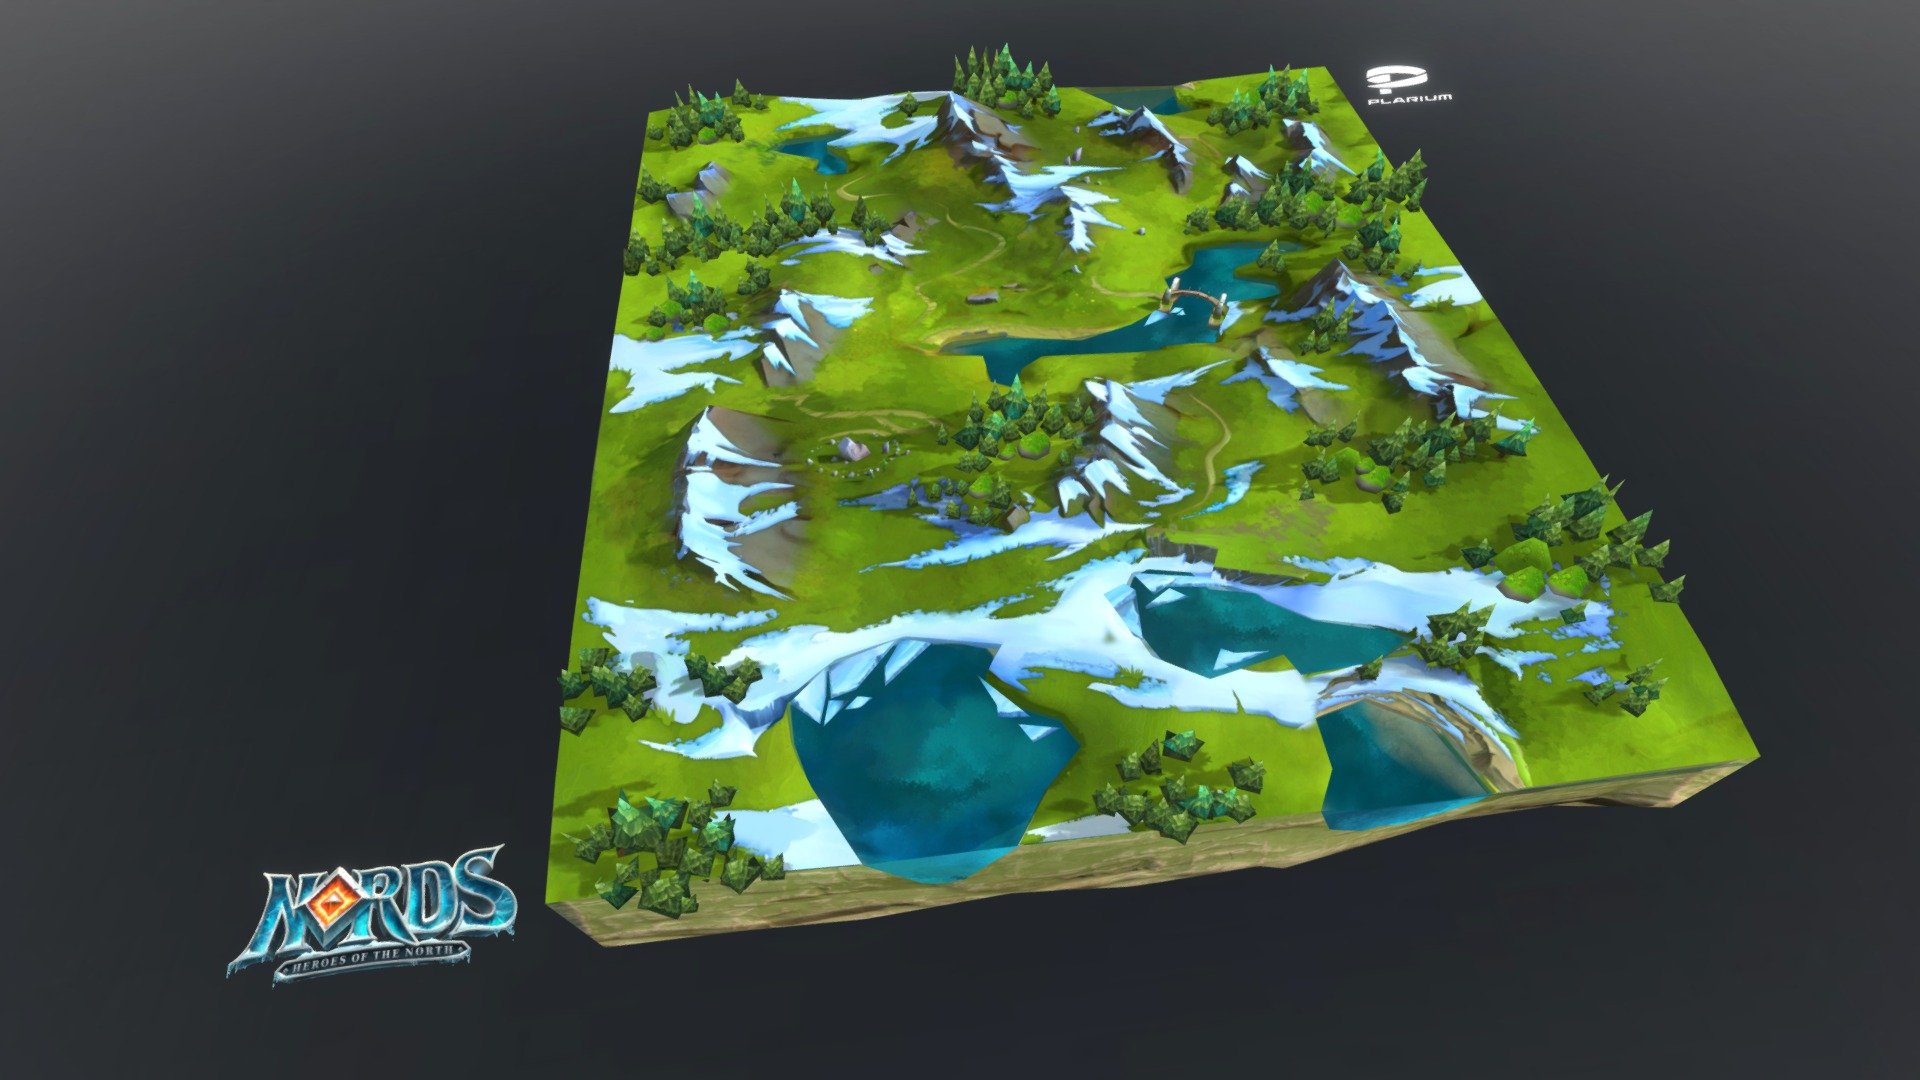 Nords. Low-poly tile of world map 3d model